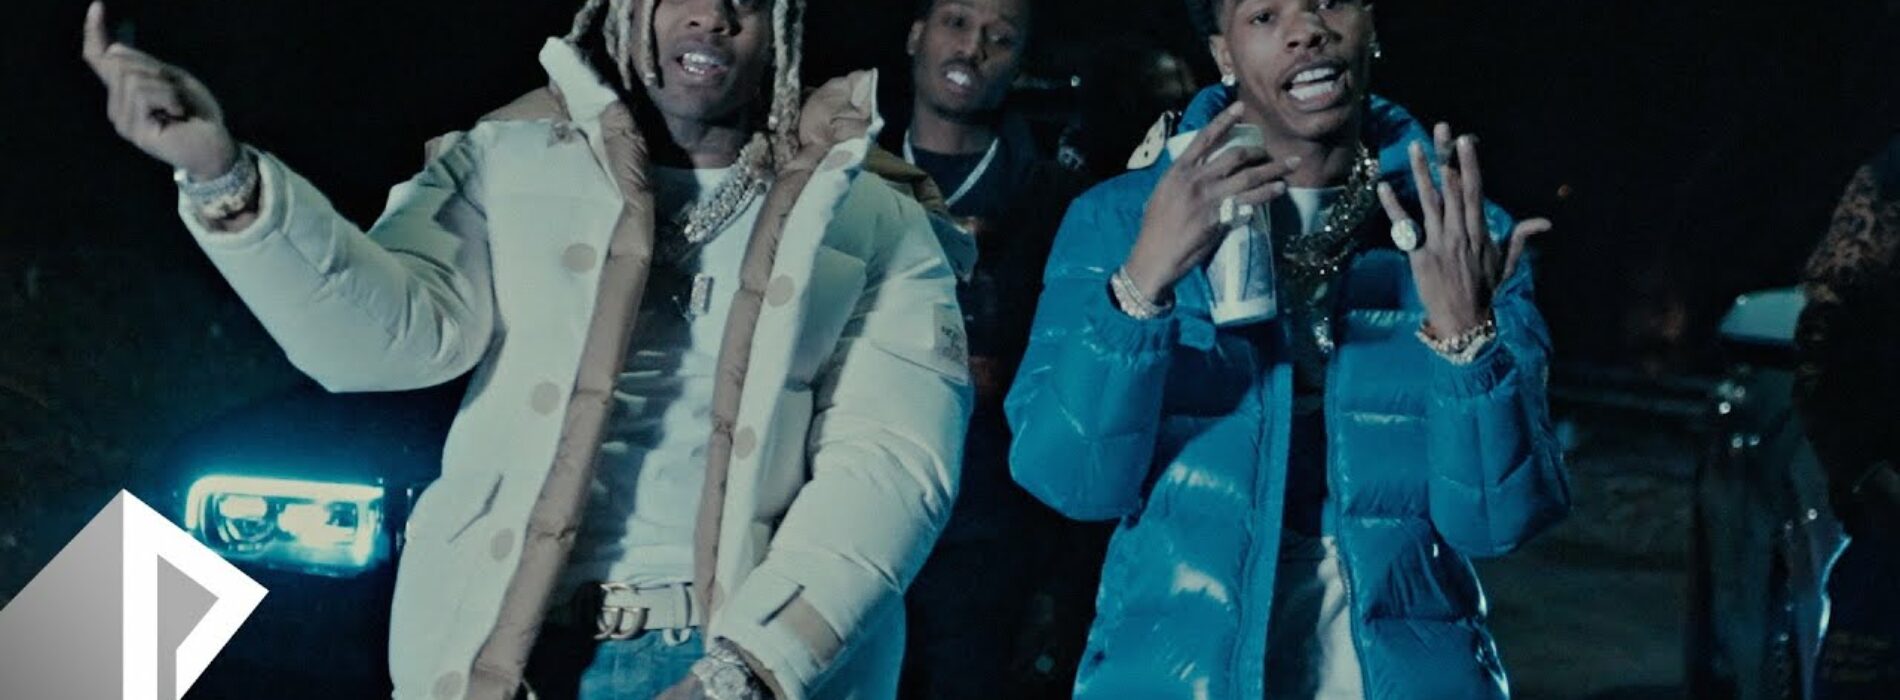 Lil Durk – Finesse Out The Gang Way feat. Lil Baby (Official Music Video) – Février 2021